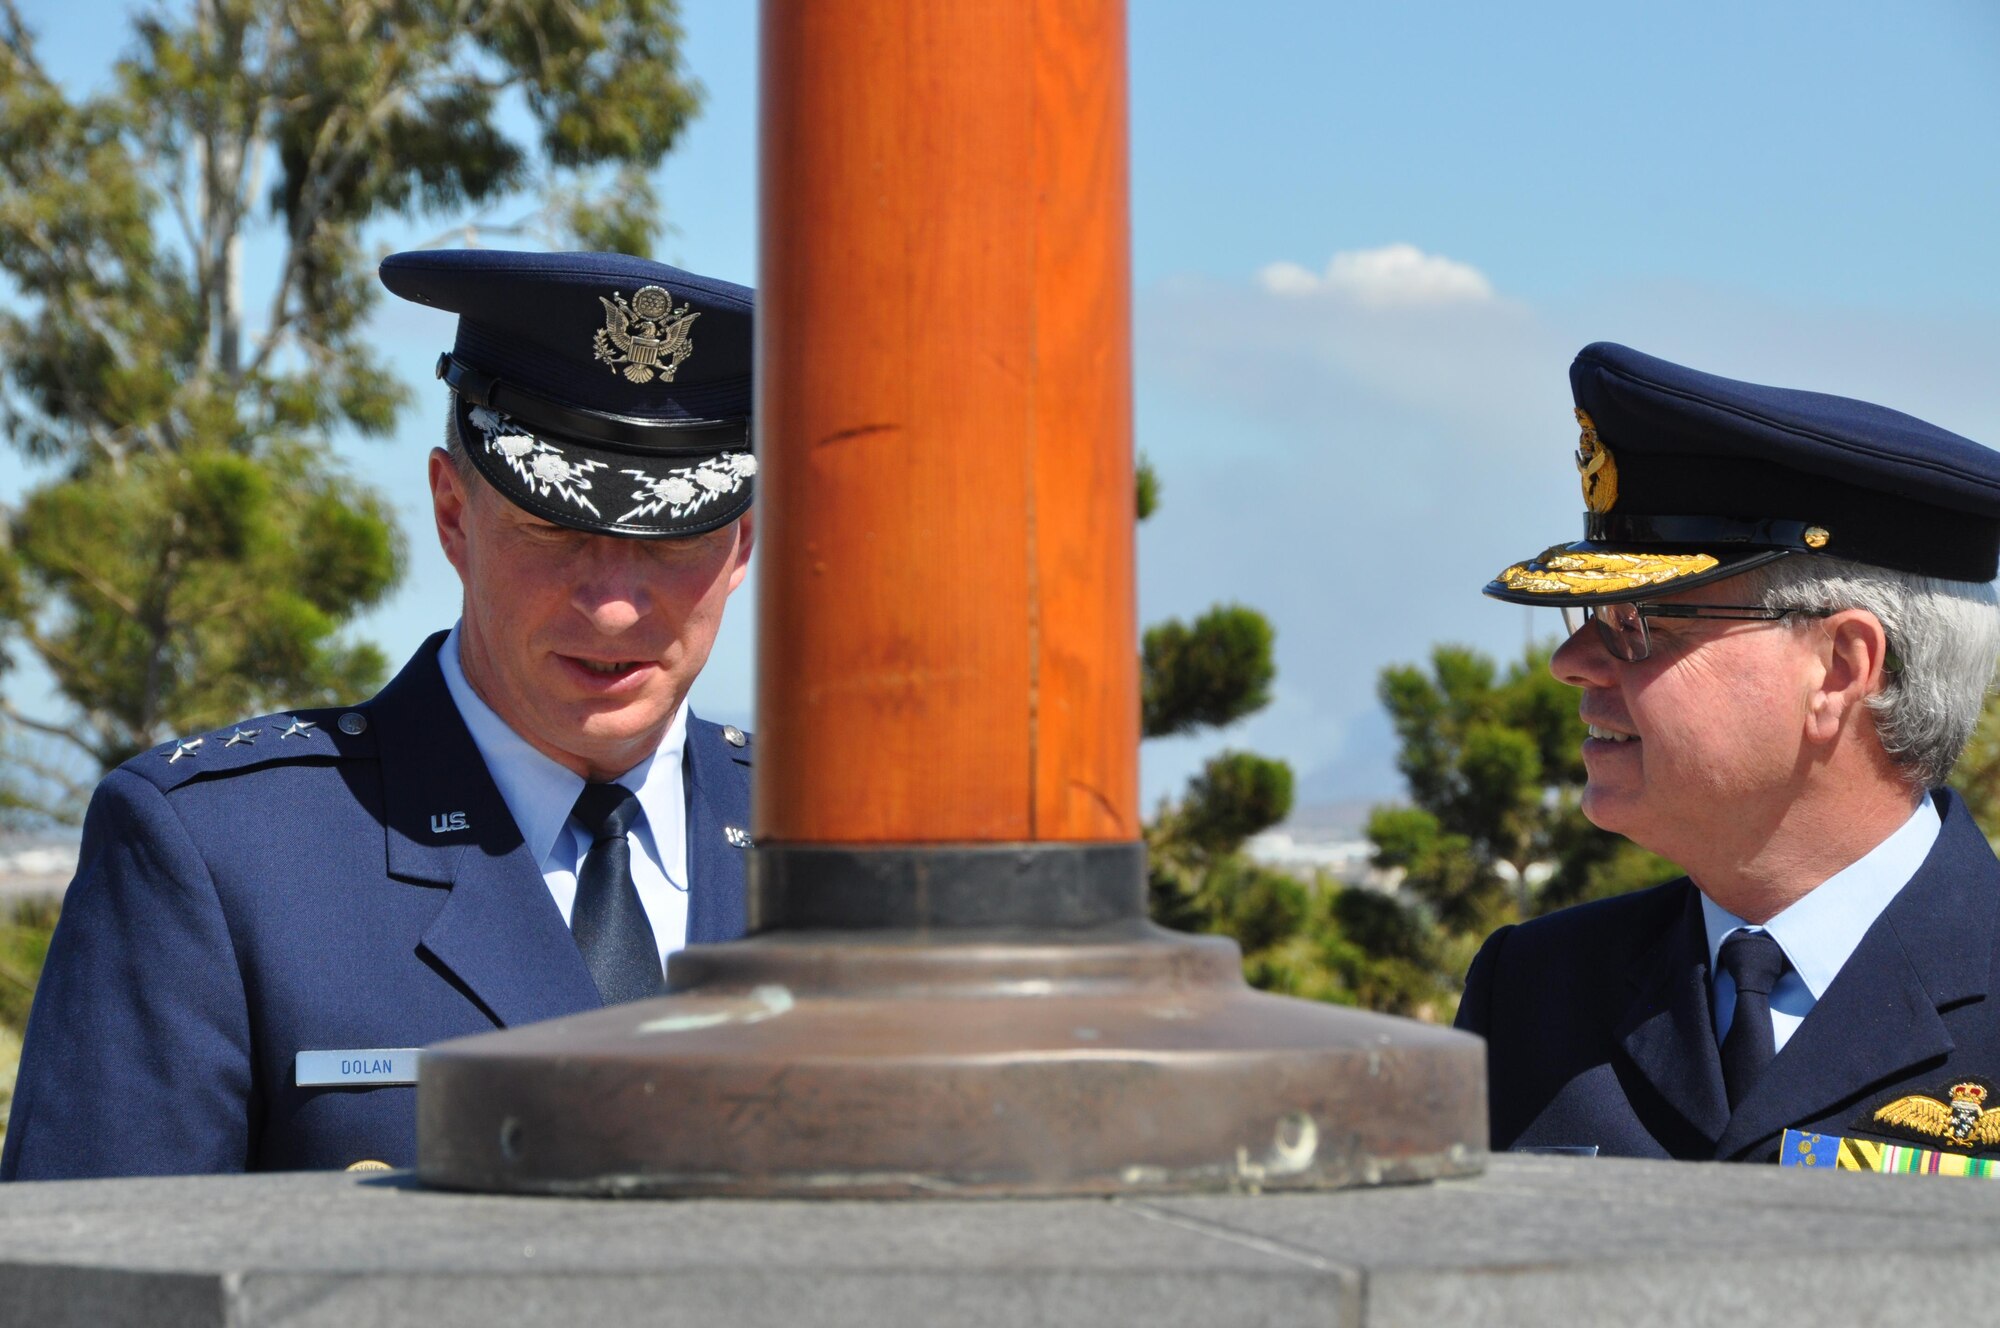 Lt. Gen. John Dolan, Commander, 5th Air Force, and Australian Air Vice-Marshal Kym Osley, Active Reserve Staff Group, discuss the sacrifices made by the men and women who served in 5th Air Force during World War II after the 5th Air Force Memorial Service held in Townsville, Australia Aug. 16, 2015. The 5th Air Force Memorial at Kissing Point, Townsville, Australia, was erected to honor and remember the men and women who gave their lives and to the many thousands who gave up their youth to serve their country in 5th Air Force during WW II. (U.S. Air Force photo by Capt. George M. Tobias/Released)